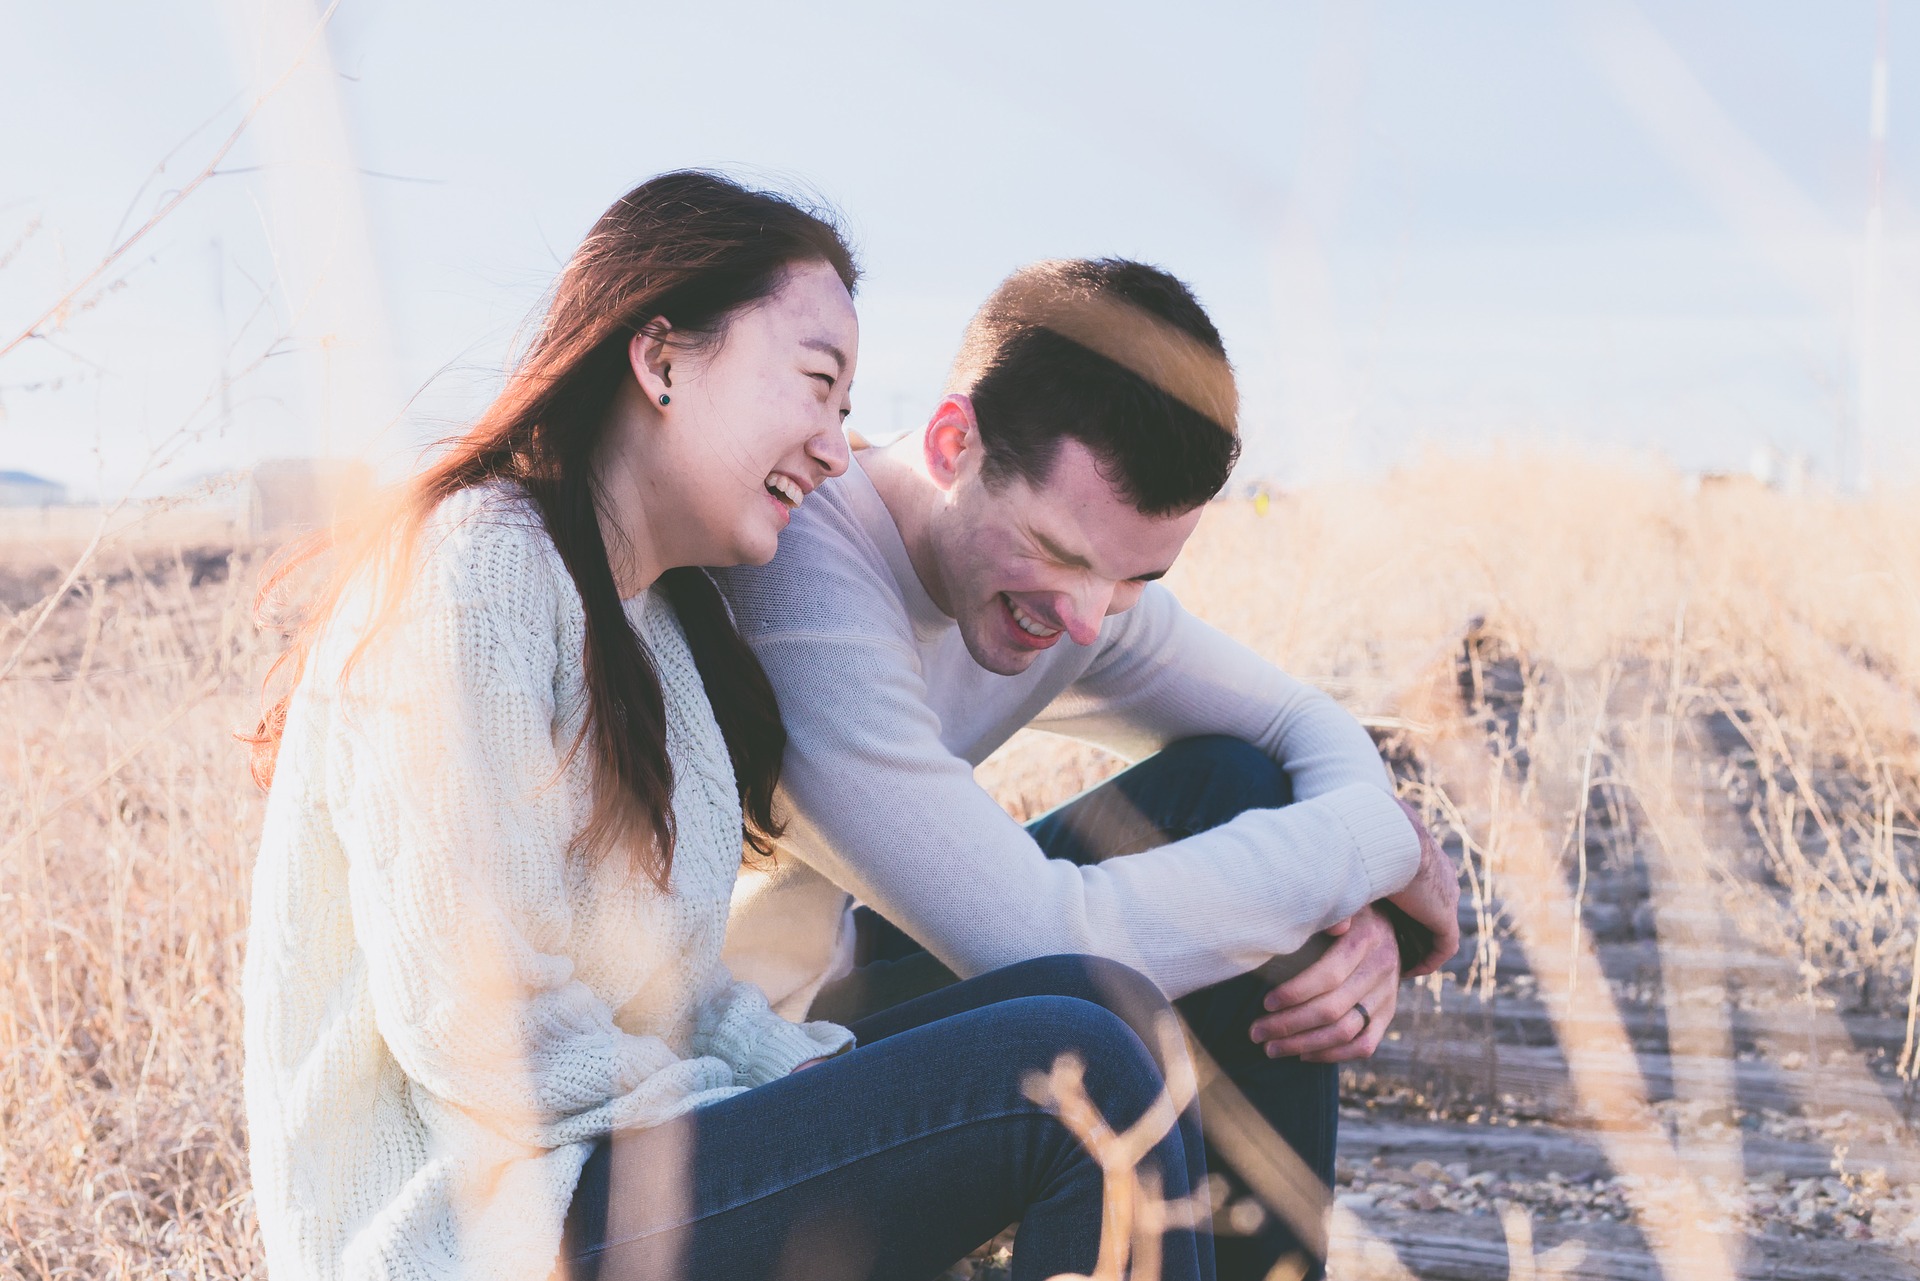 The Relationship Happiness Myth